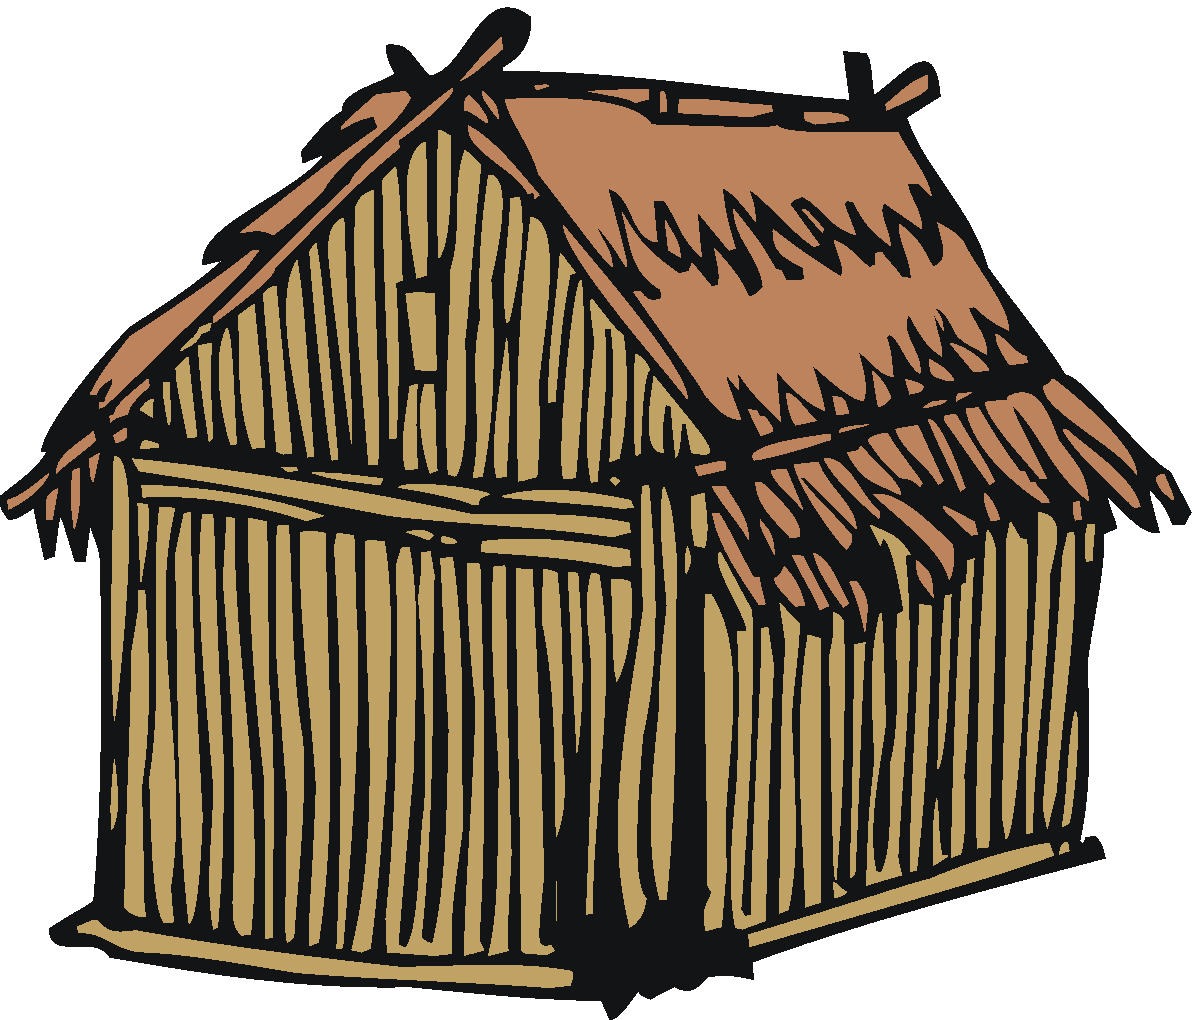 All About Comprehension: Don't Assume Too Much Wooden Hut Drawing.